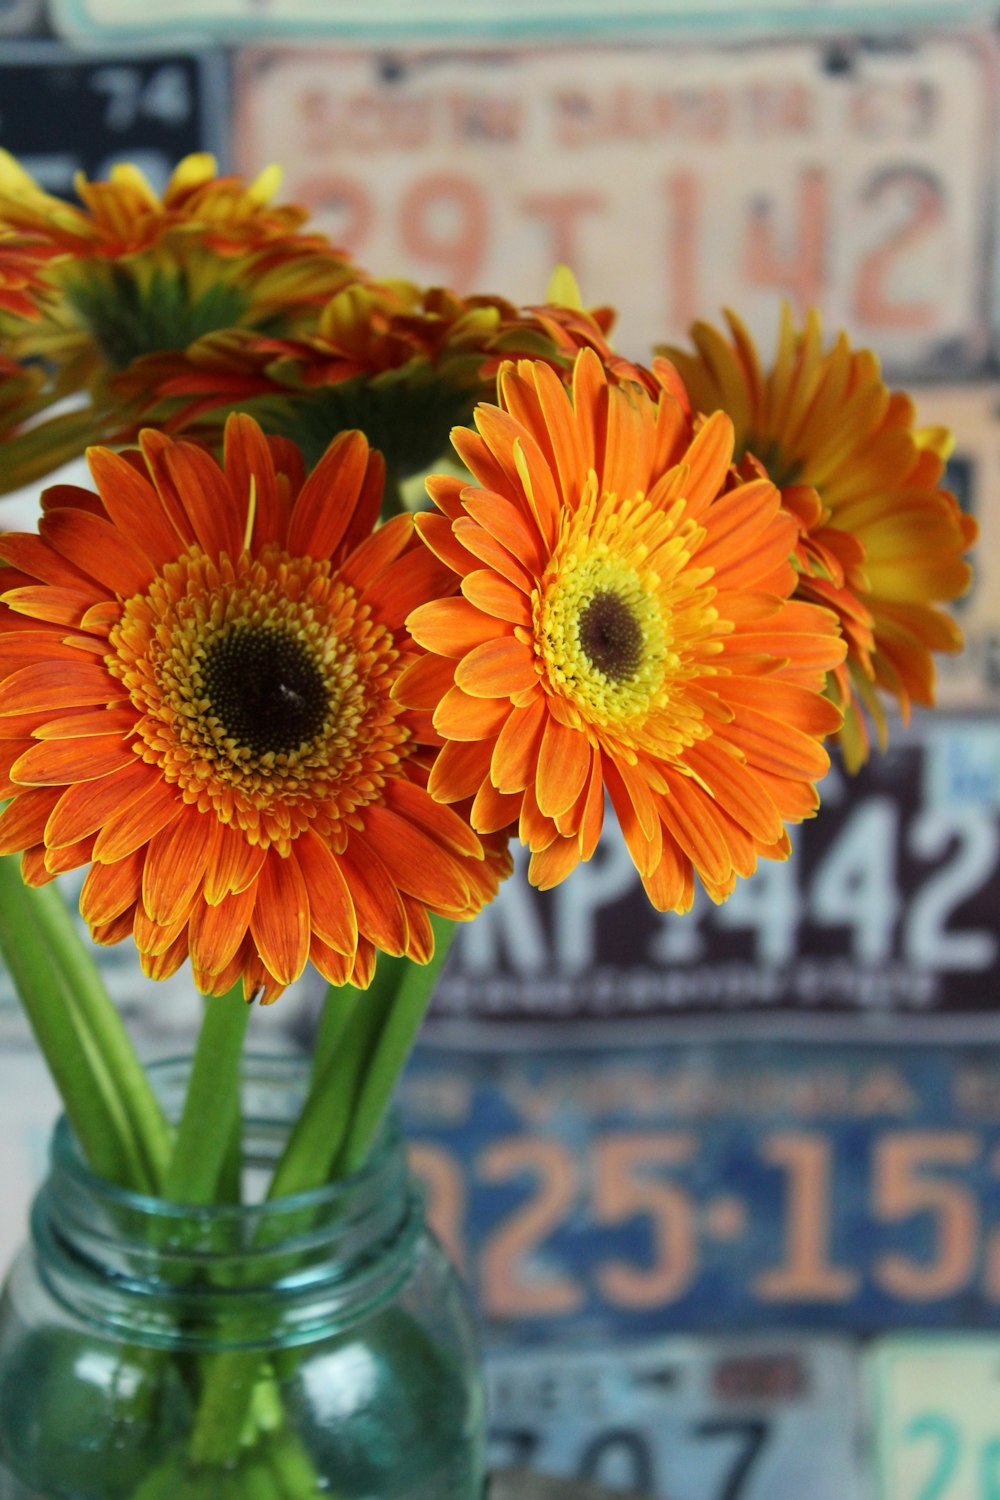 multicolored daisy flowers in clear glass vase